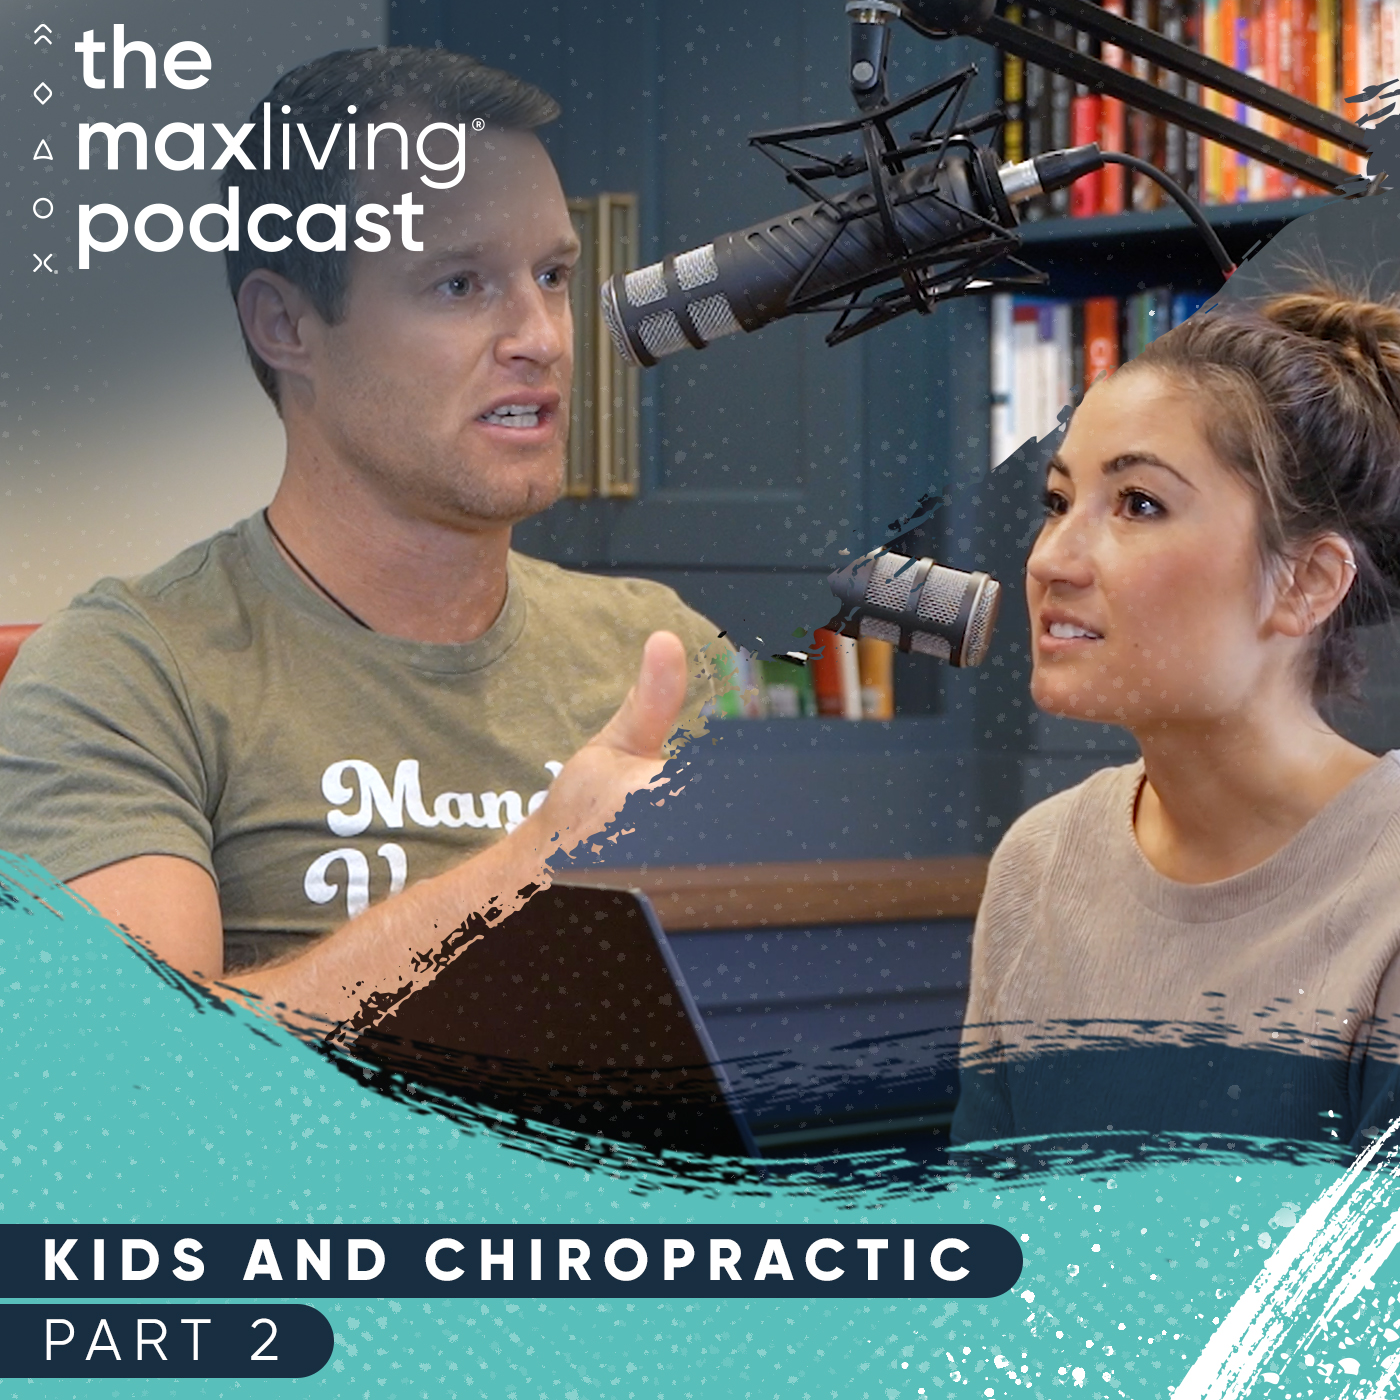 Kids and Chiropractic Part 2